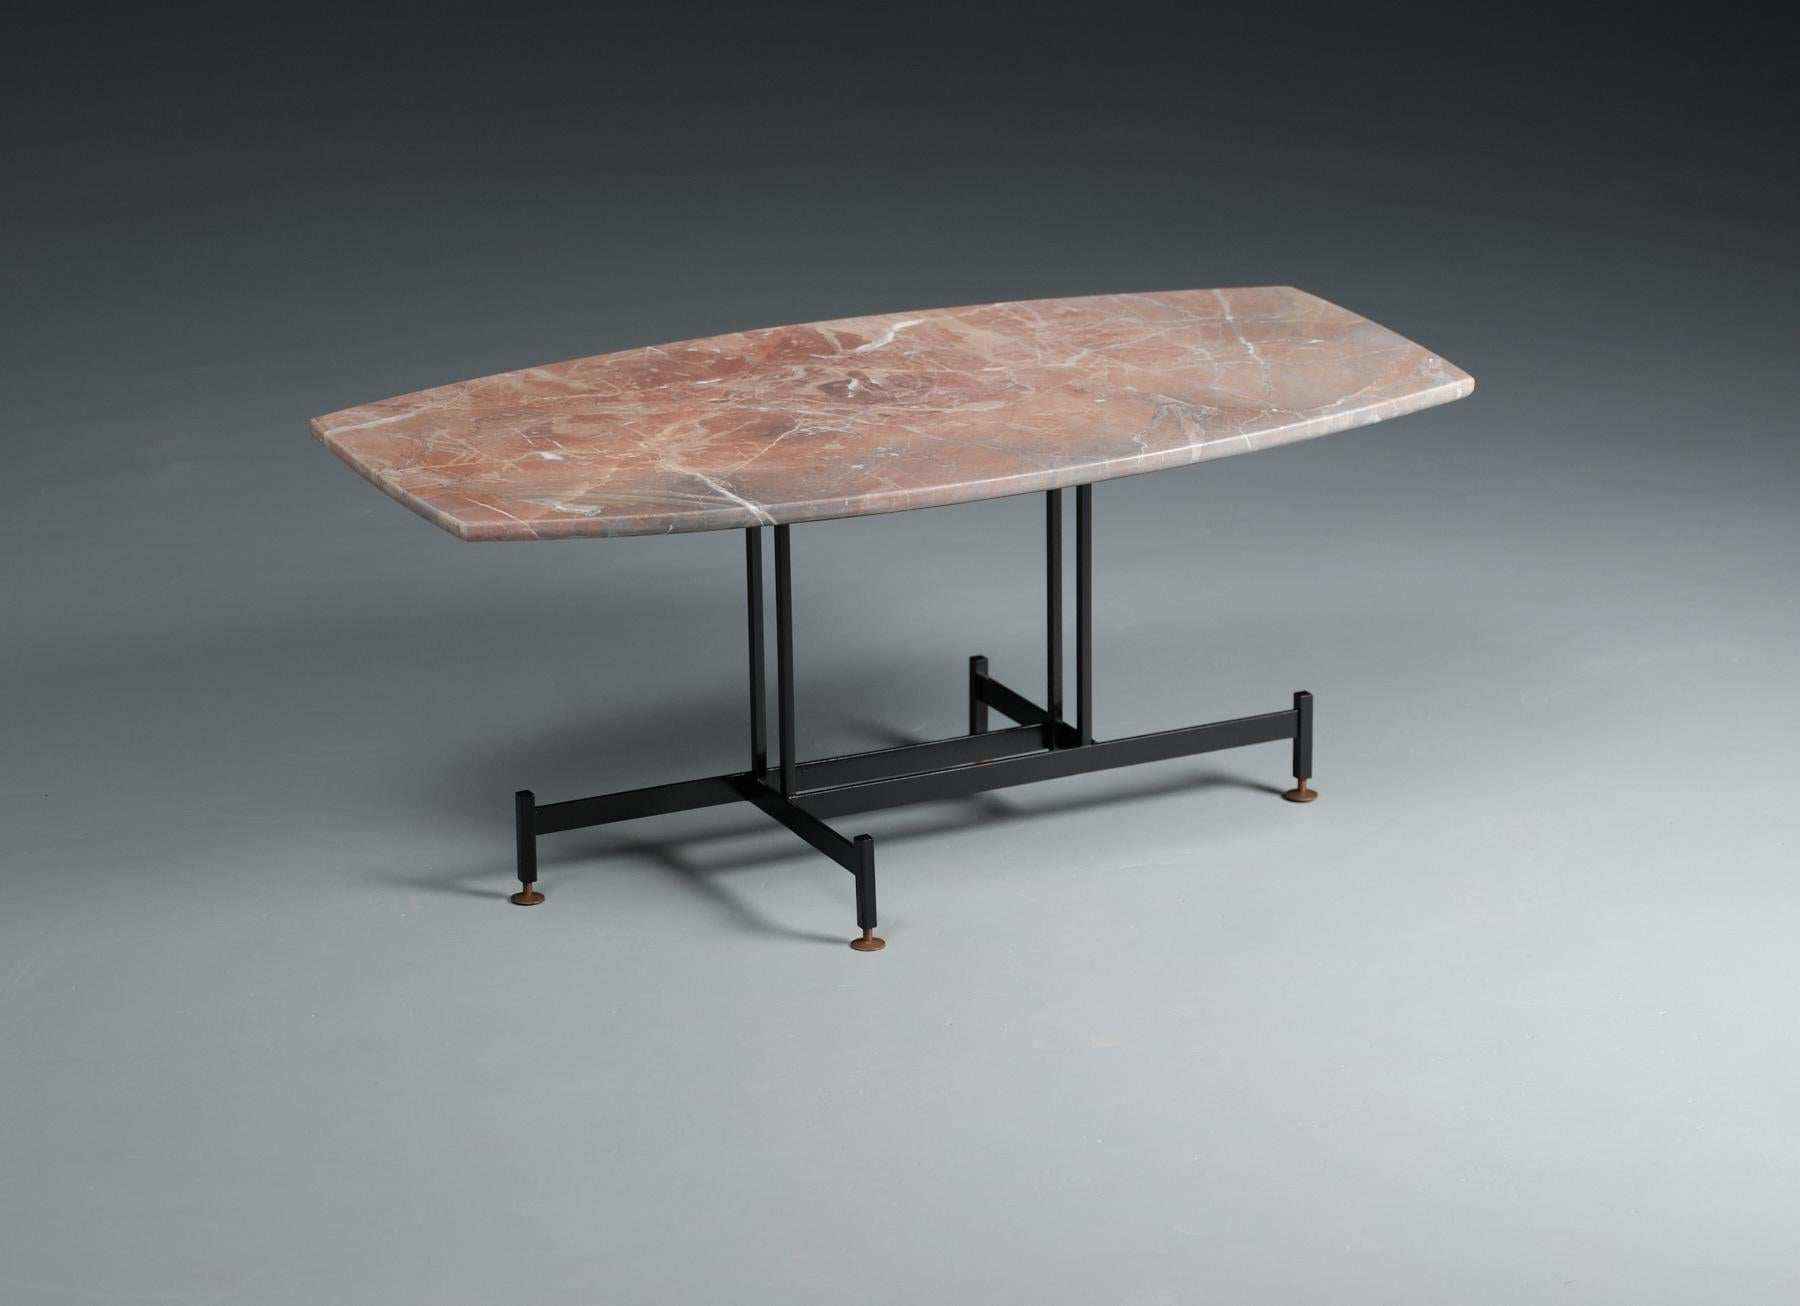 Midcentury Vintage Coffee Table with Reddish-Gray Marble Top and Geometric Iron  For Sale 2